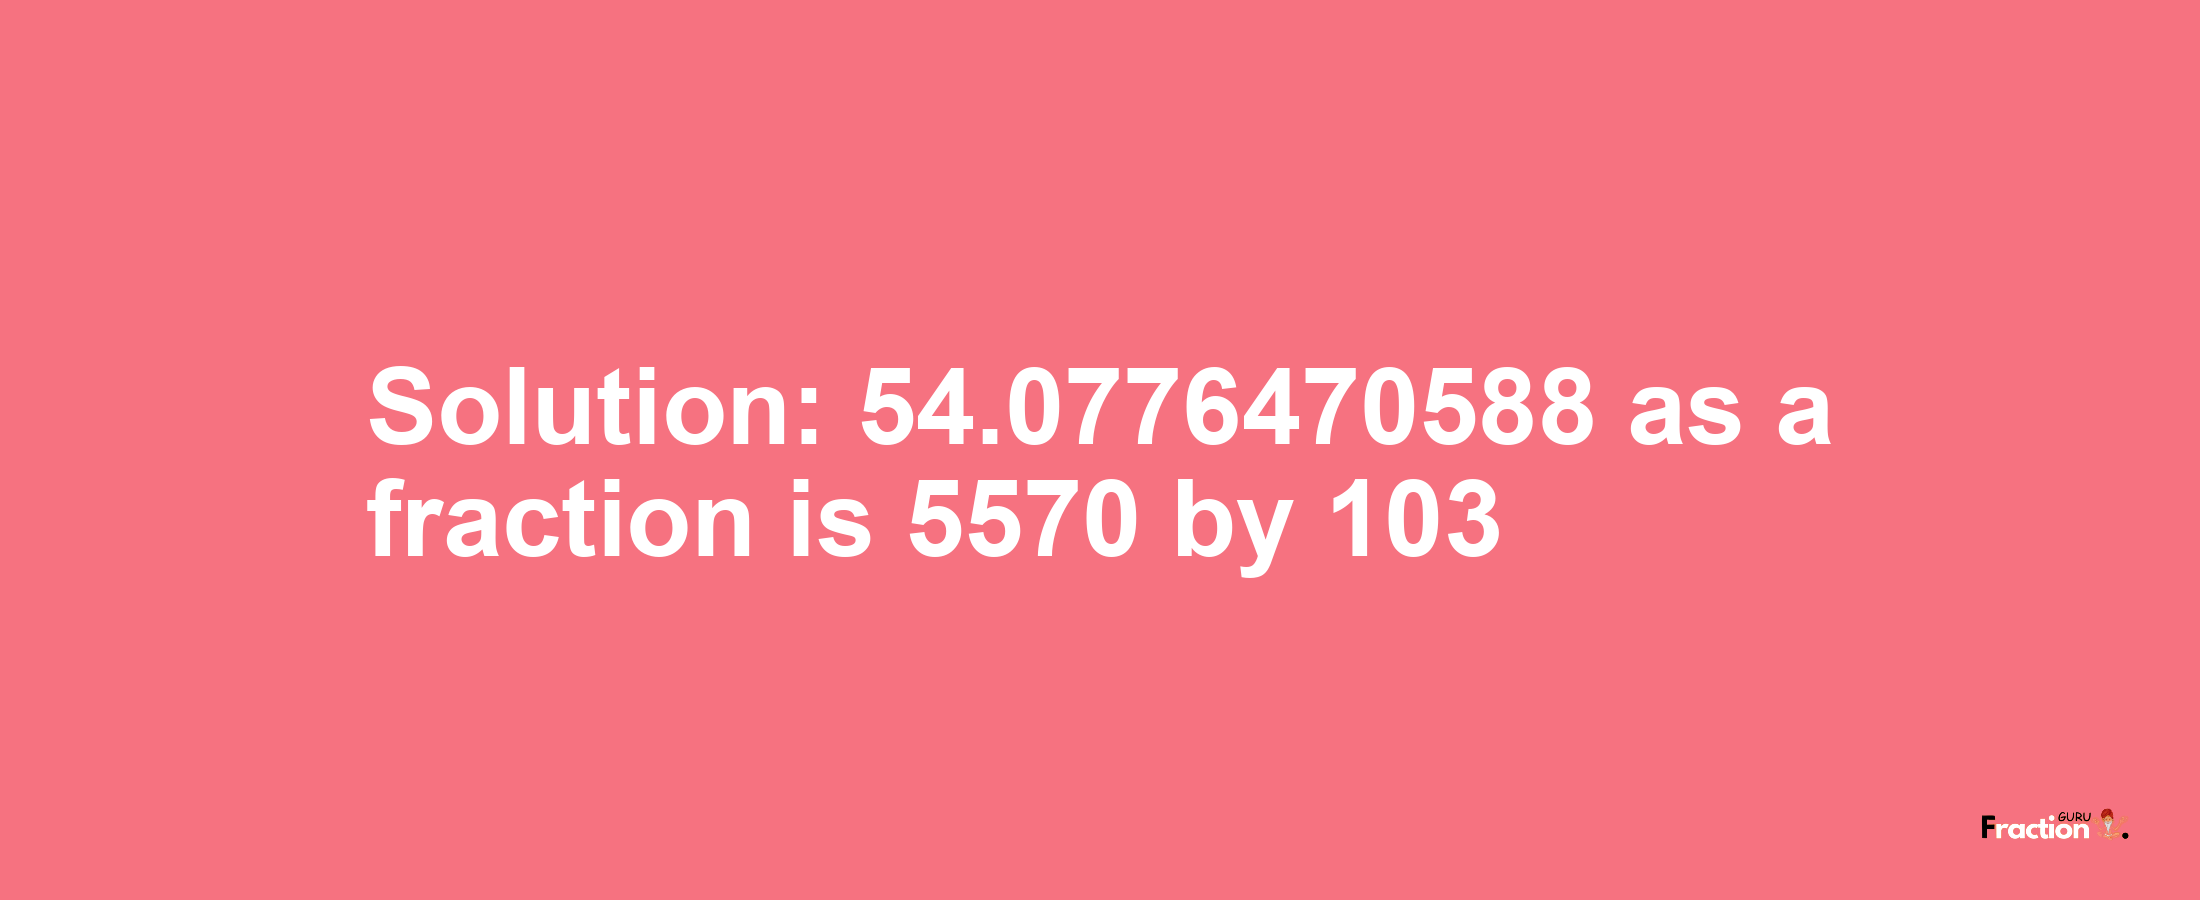 Solution:54.0776470588 as a fraction is 5570/103